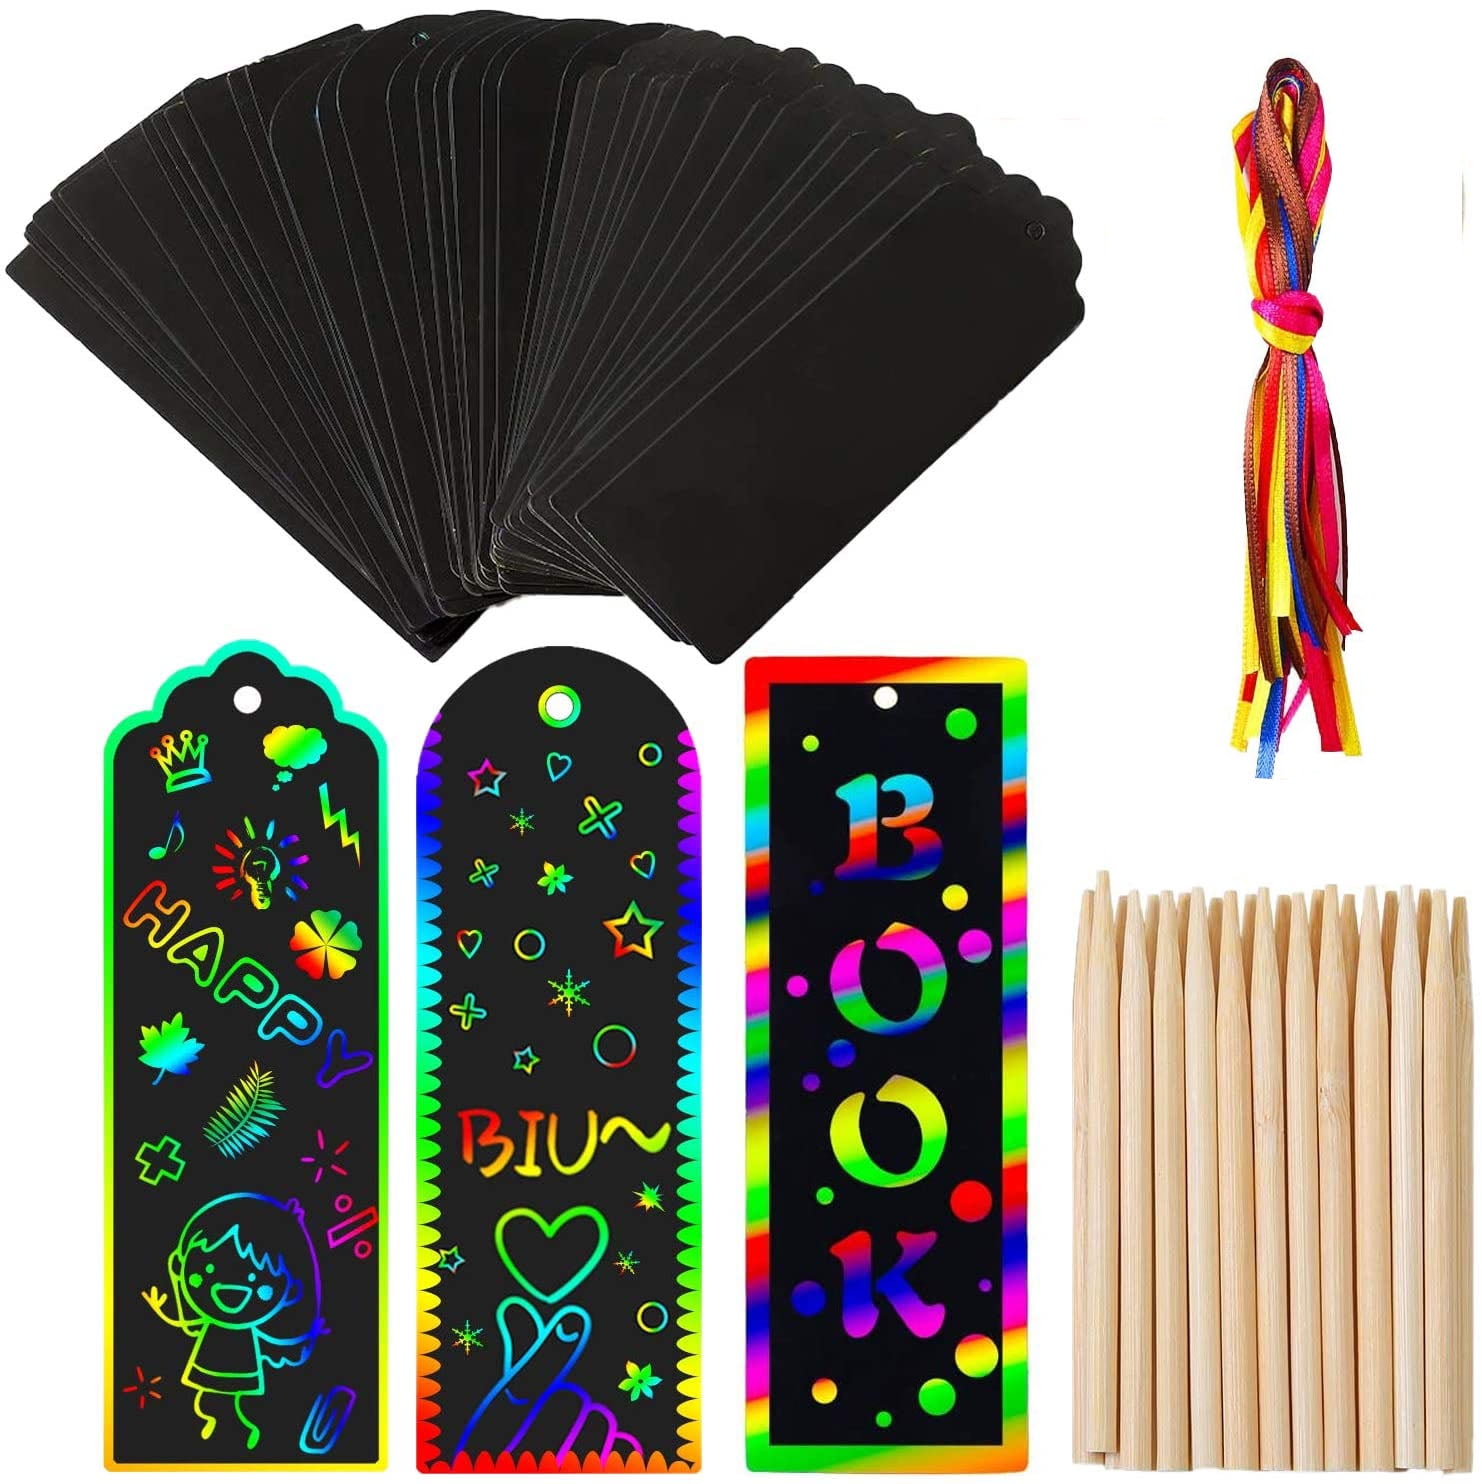 Various Art&Crafts Parties Supplies KINBOM 48pcs Halloween Scratch Paper Rainbow Scratch Paper with 24pcs Wooden Styluses and 48pcs Ribbons for Halloween Theme Decor